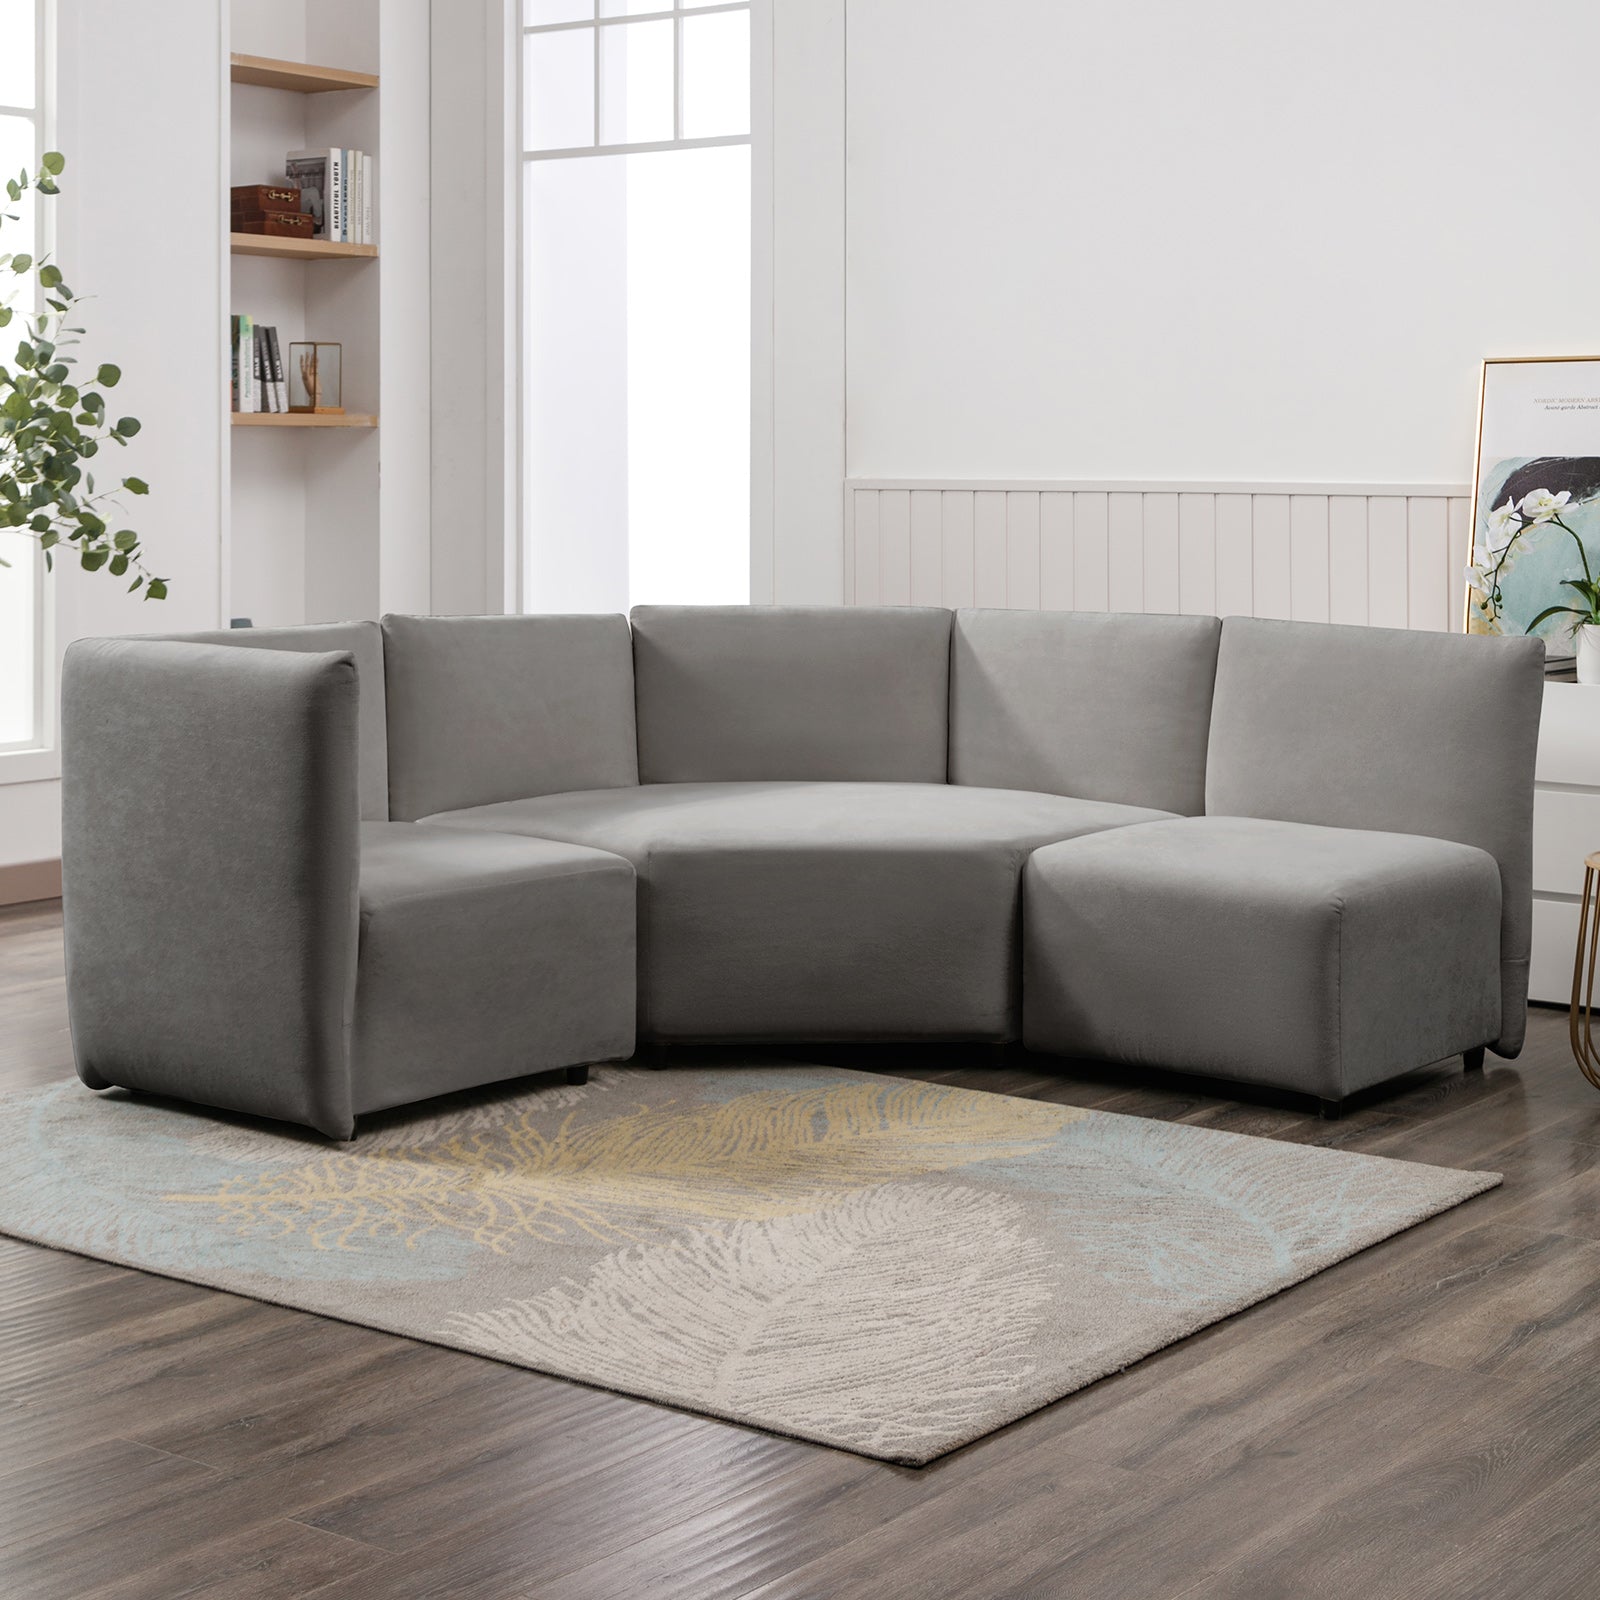 Cecer 3-Piece Free Combination Curved Modular Sectional Sofa